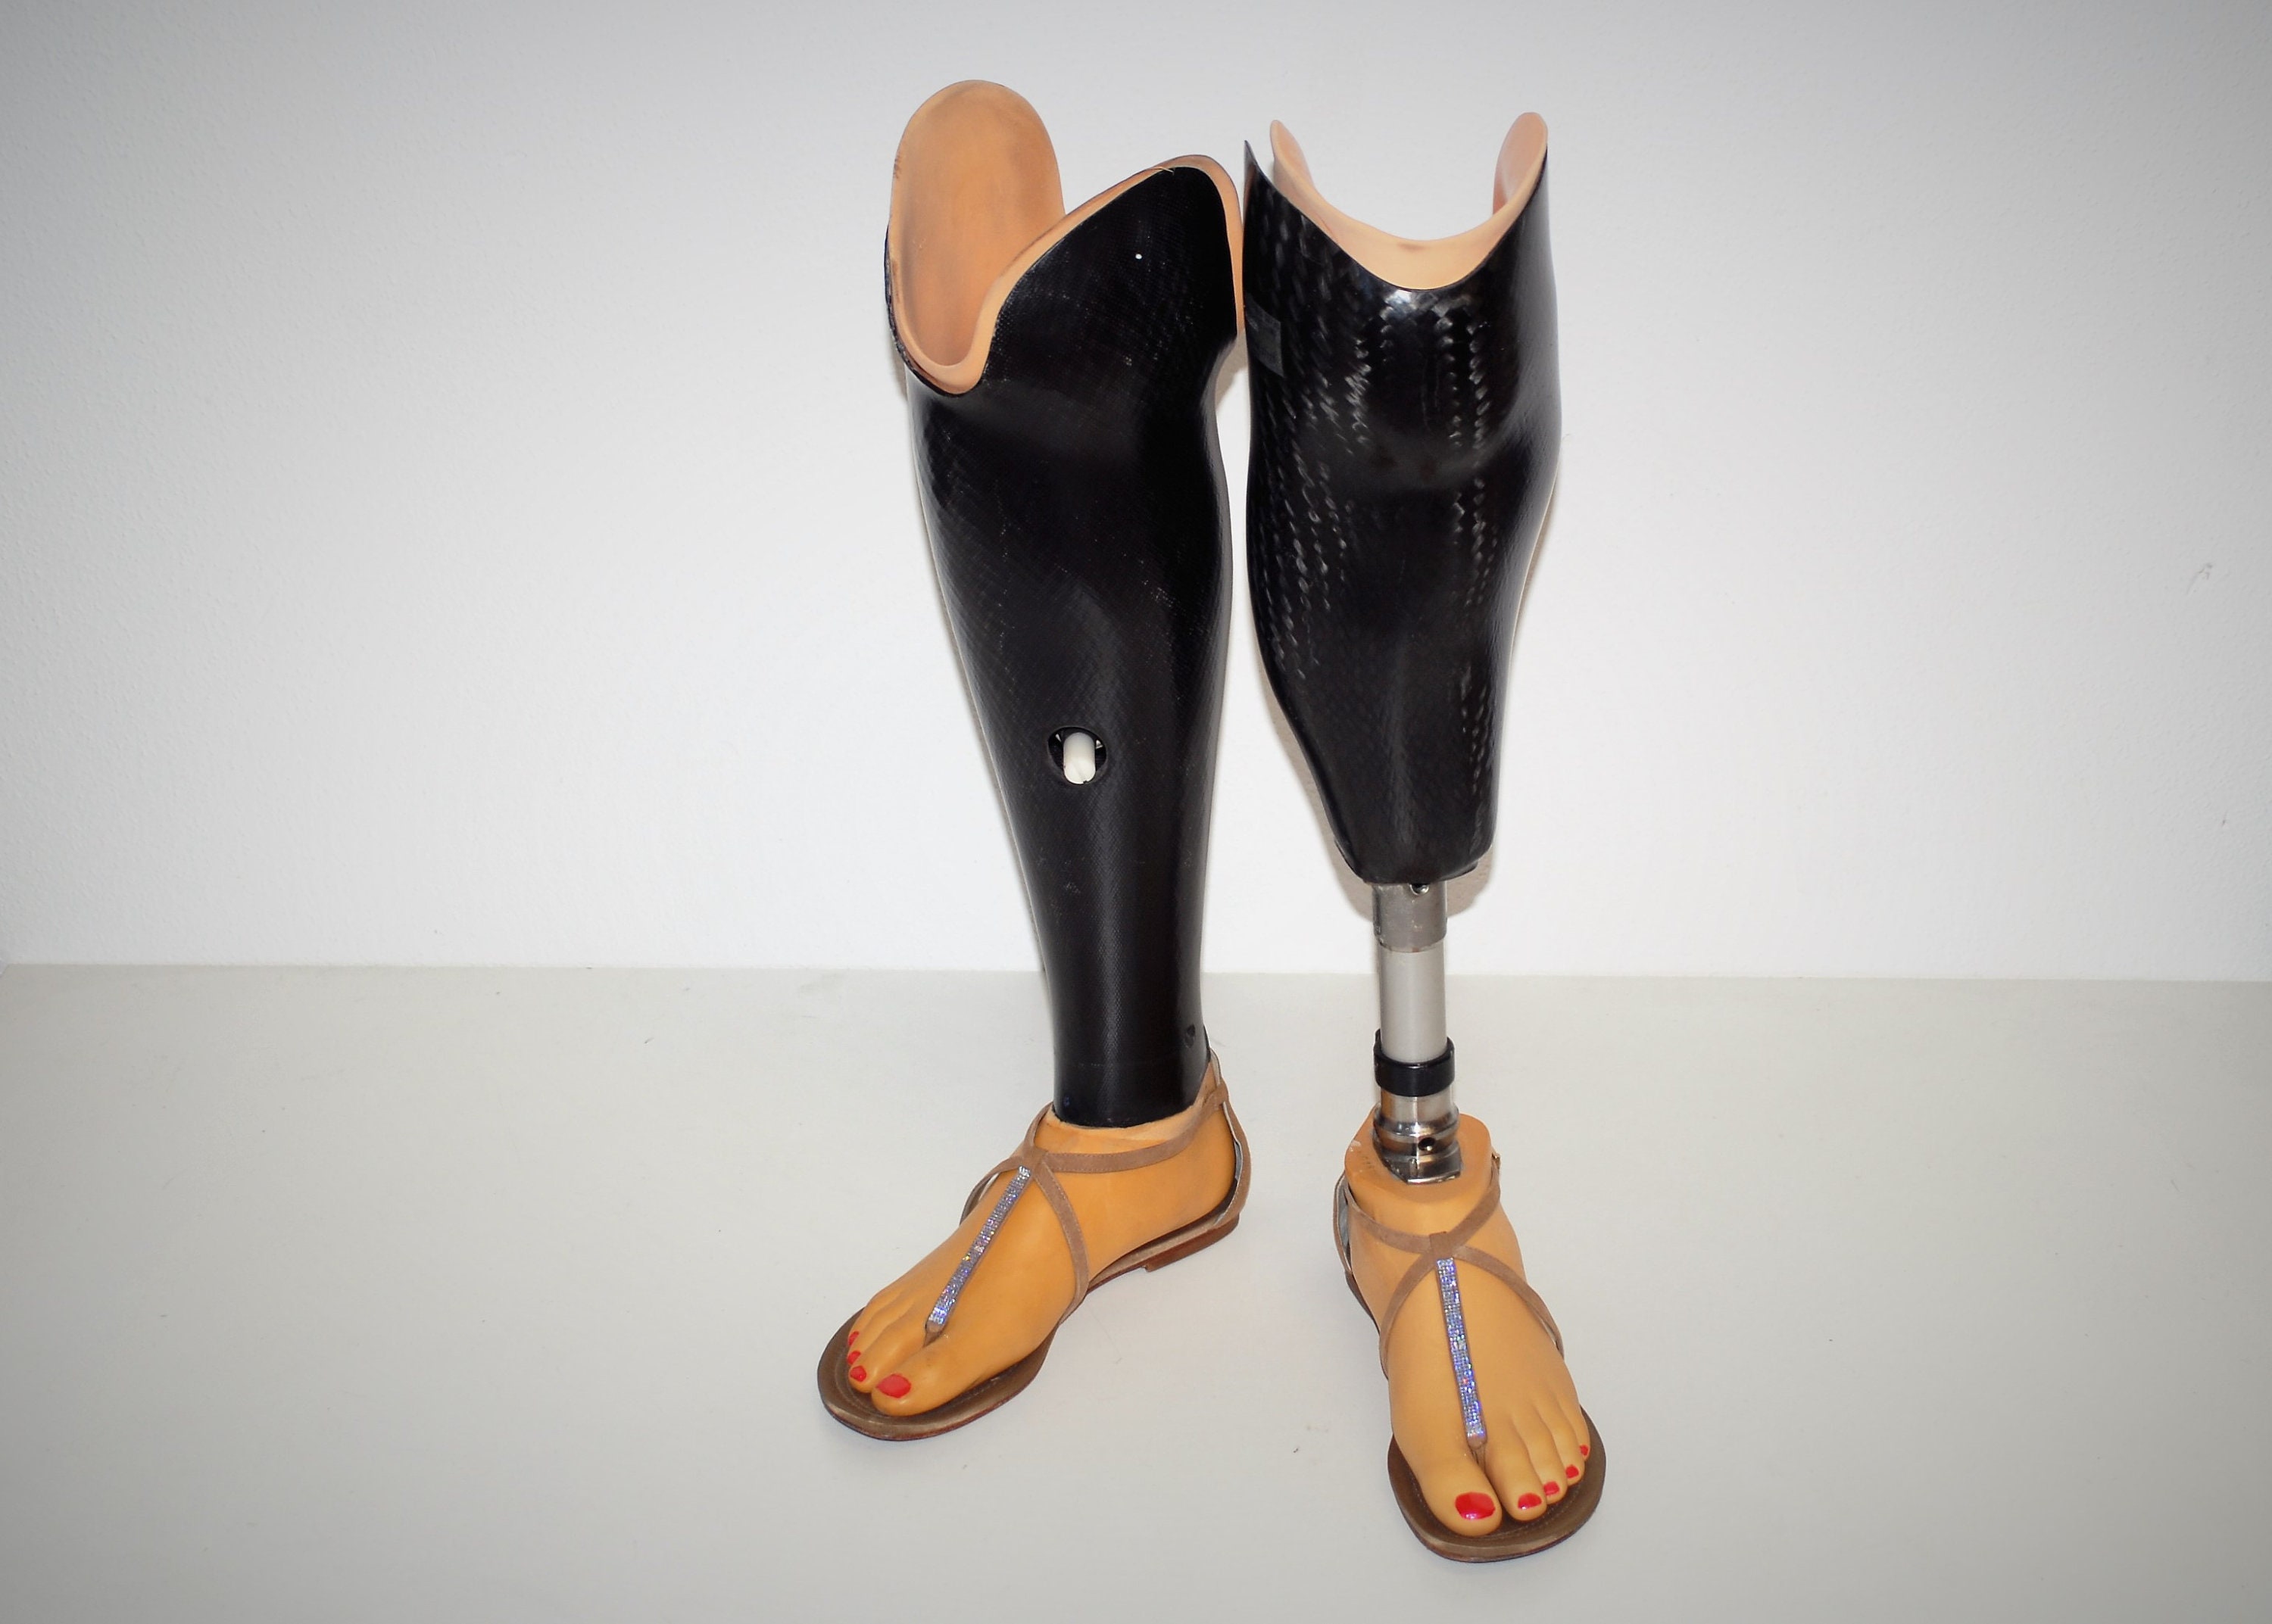 100% Silicone Prosthetic Leg Skin Cover - BK Below Knee Amputees